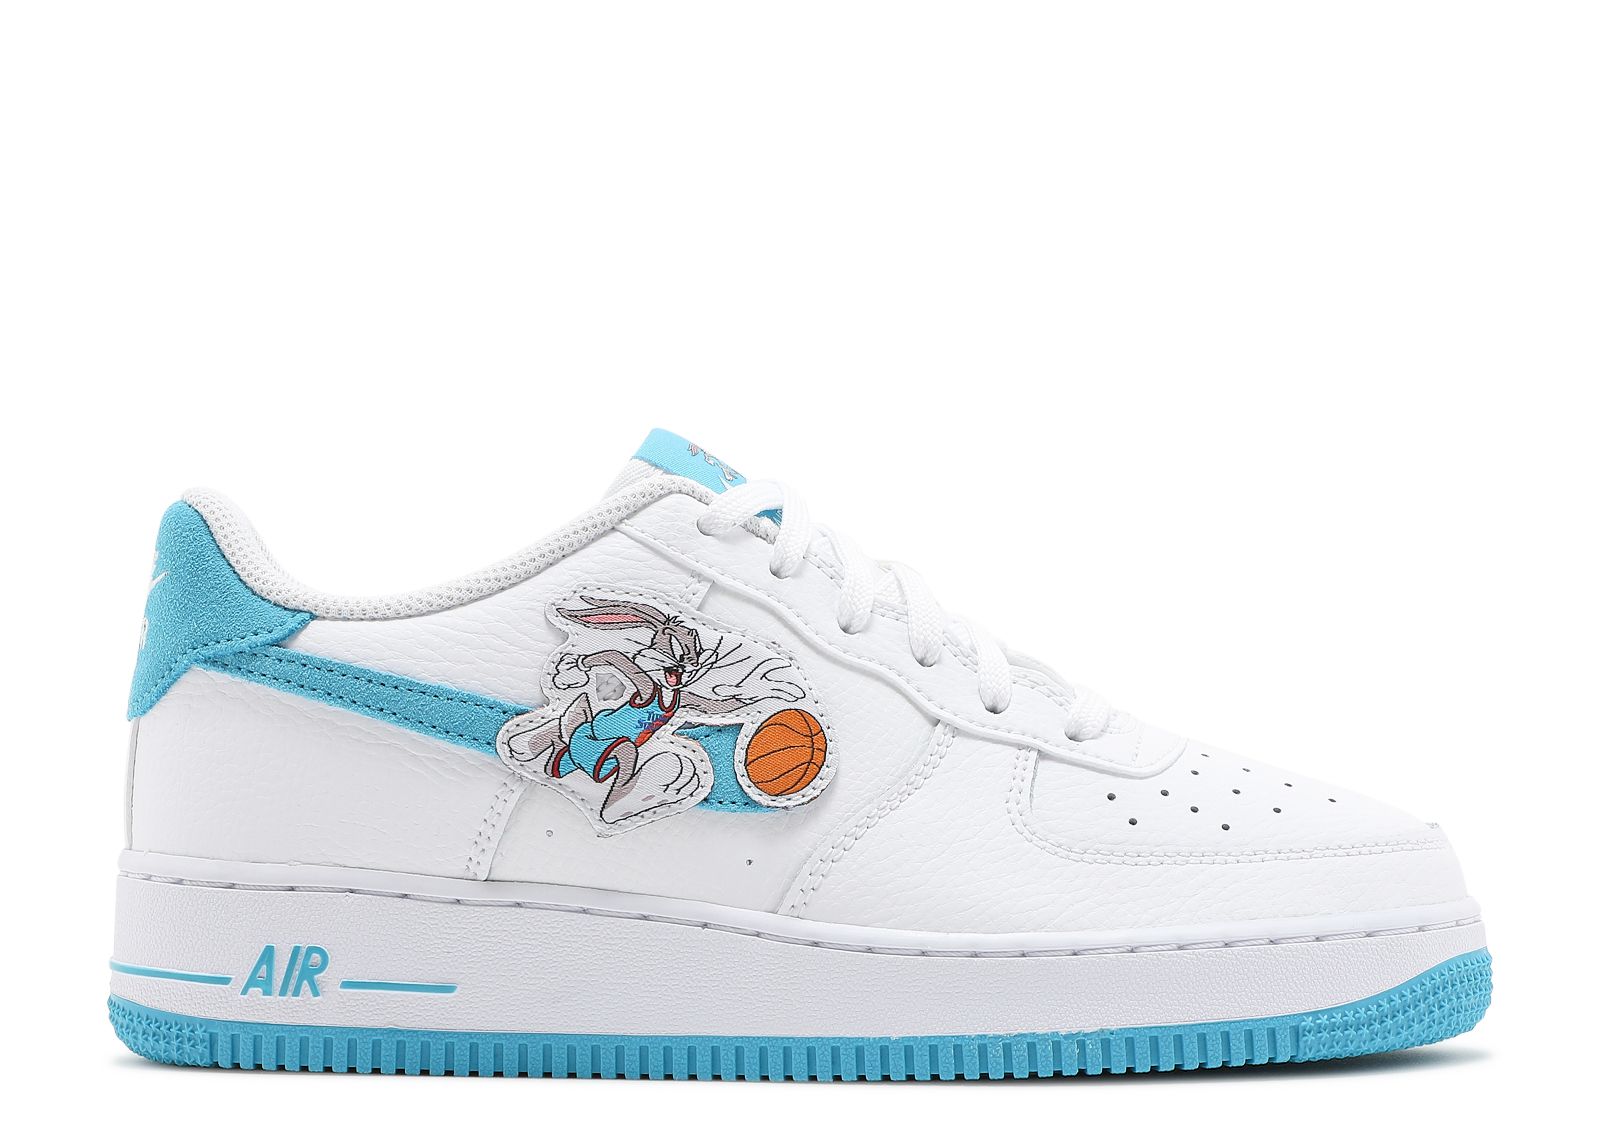 space jam x nike air force 1 hare